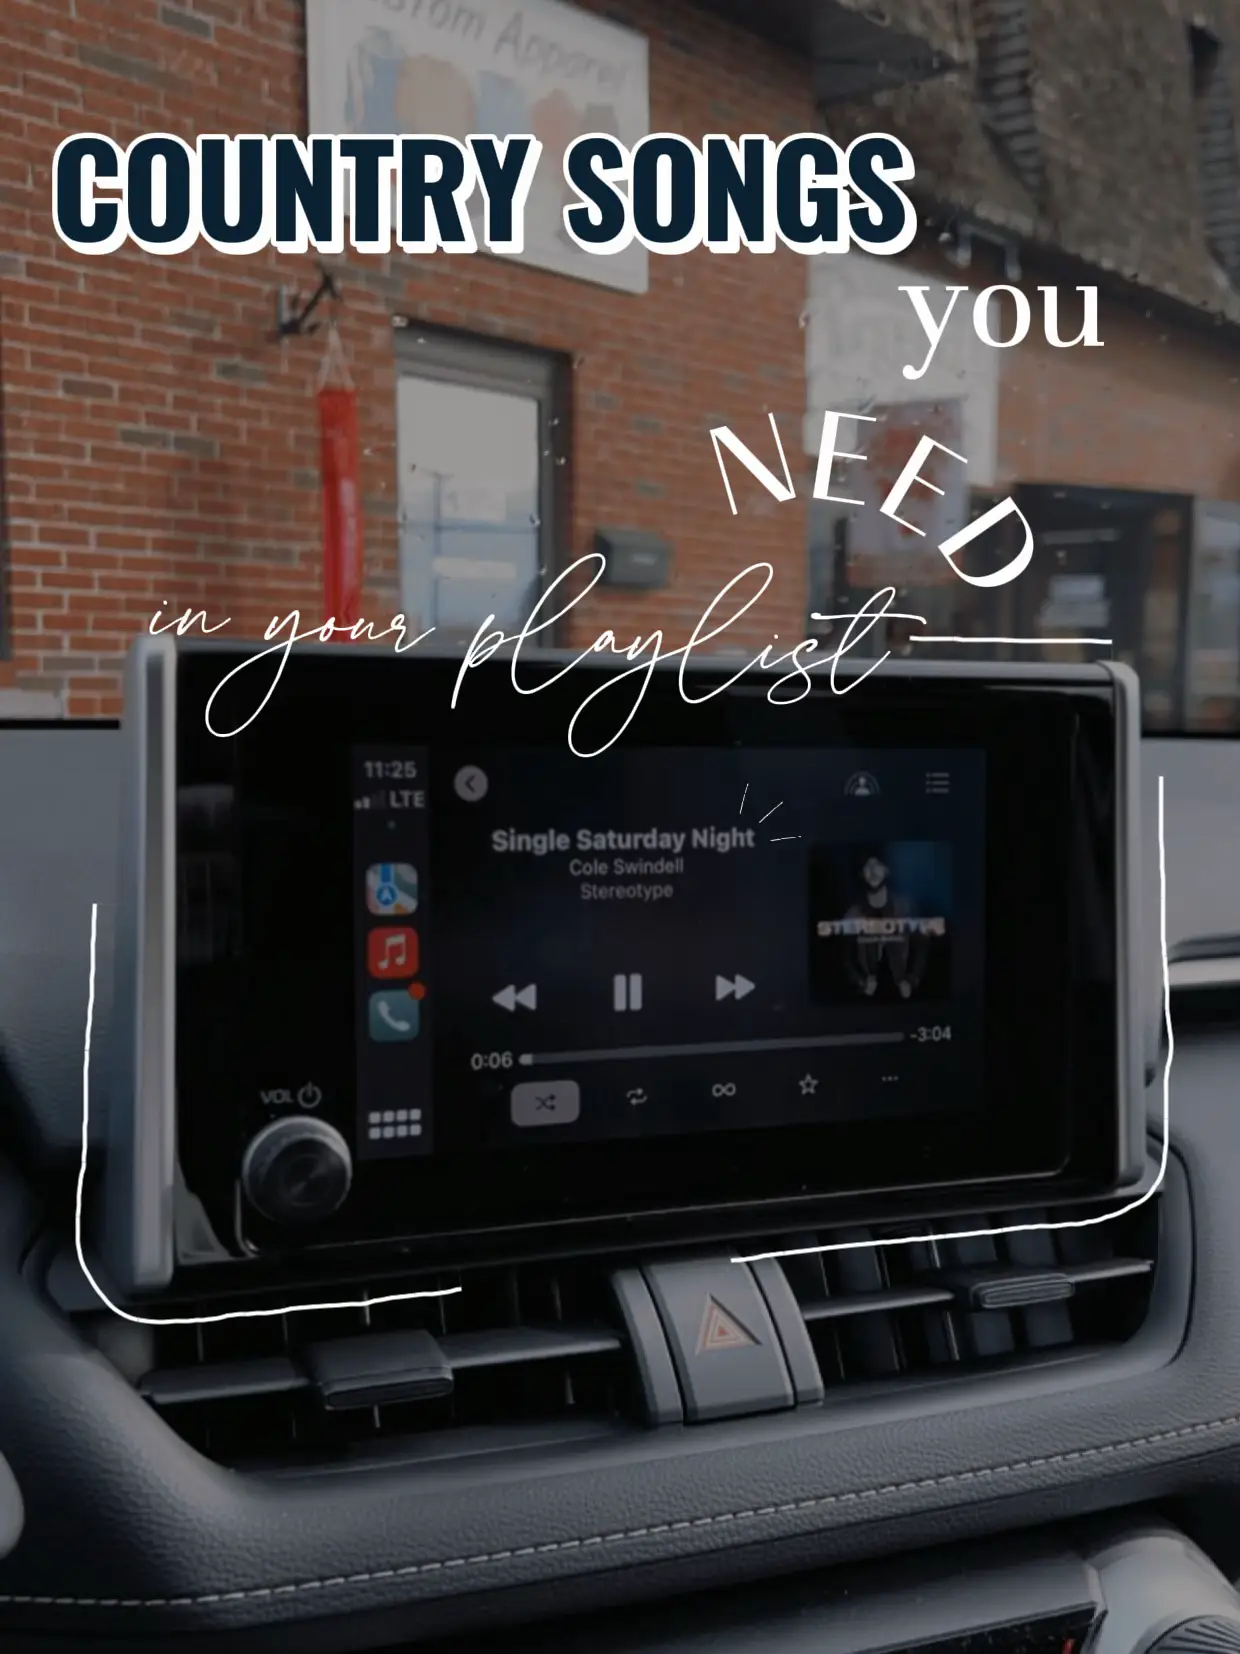 COUNTRY SONGS TO ADD TO YOUR PLAYLIST 🎵🤠 's images